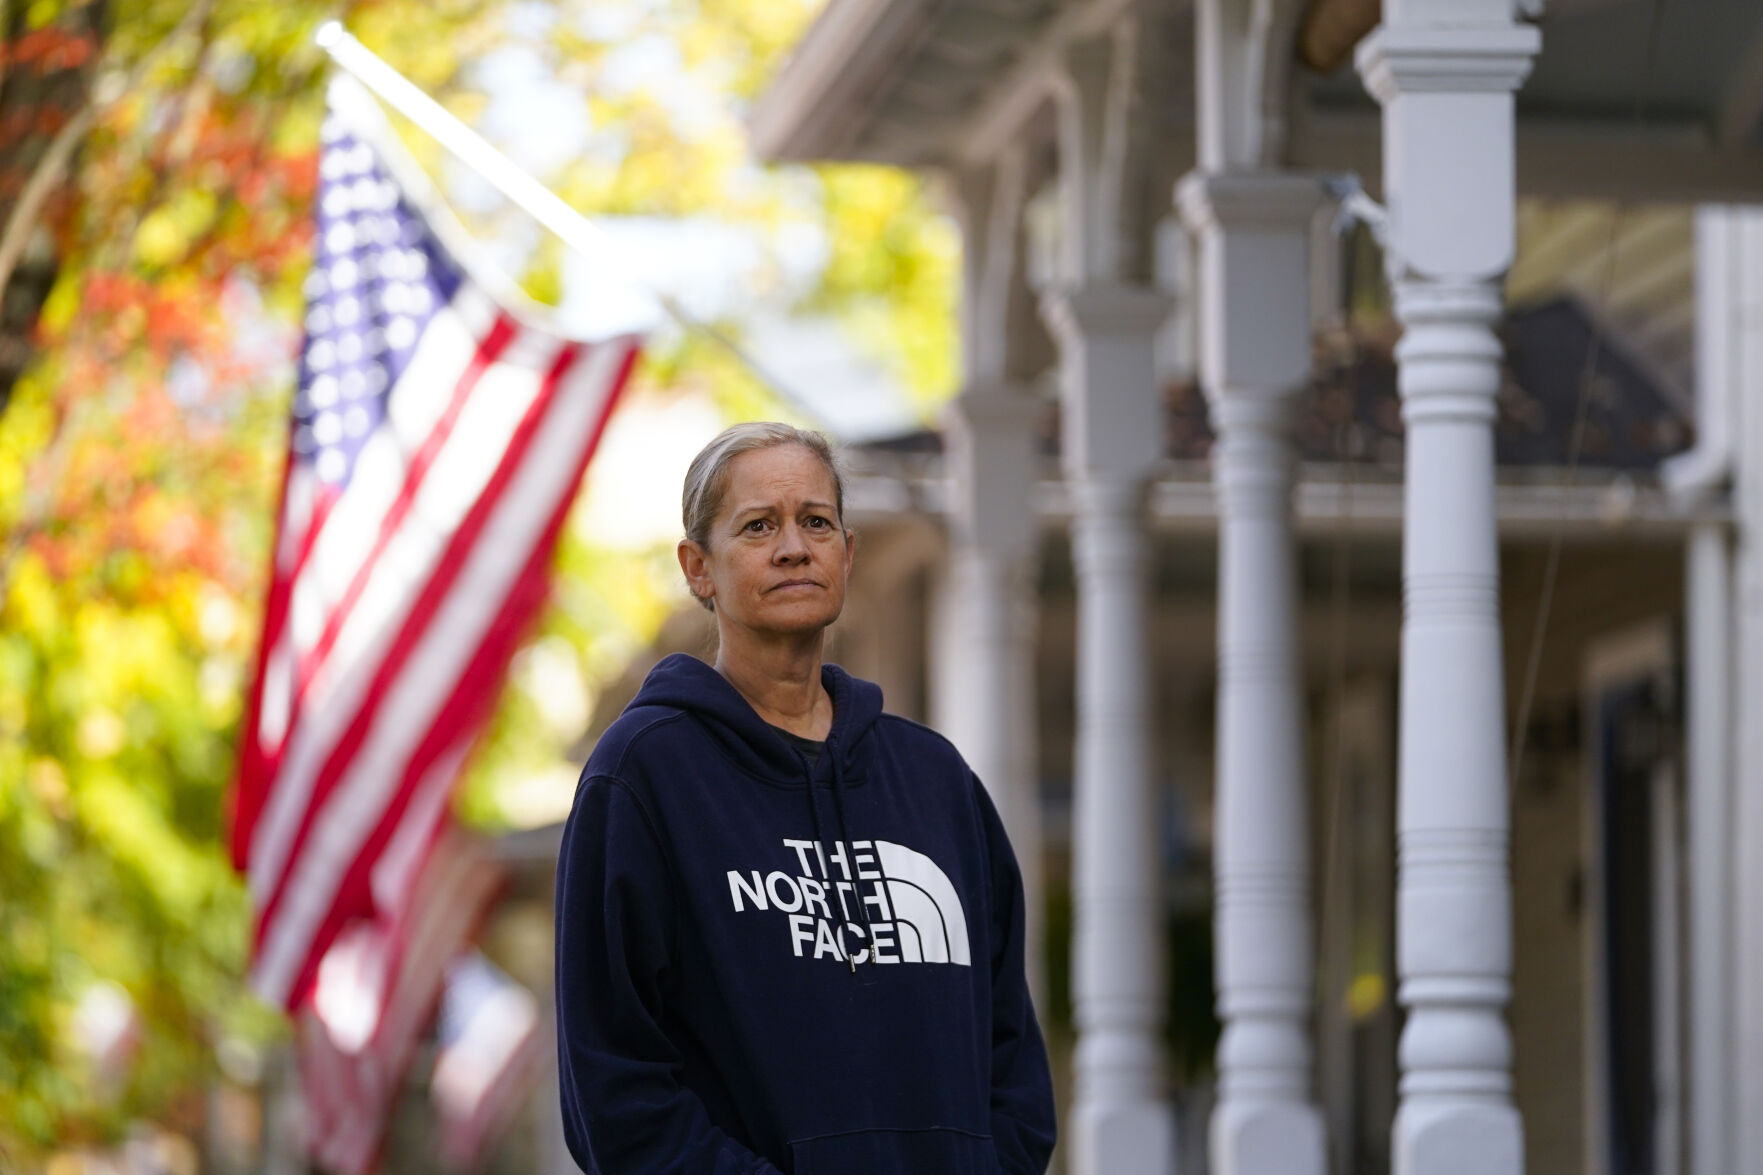 <p>Jennifer Quade poses for The Associated Press, Friday, Nov. 4, 2022, in Chestertown, Md. She moved to the rural community from Baltimore more than 20 years ago and says the U.S. is at a crossroads. (AP Photo/Julio Cortez)</p>   PHOTO CREDIT: Julio Cortez - staff, AP